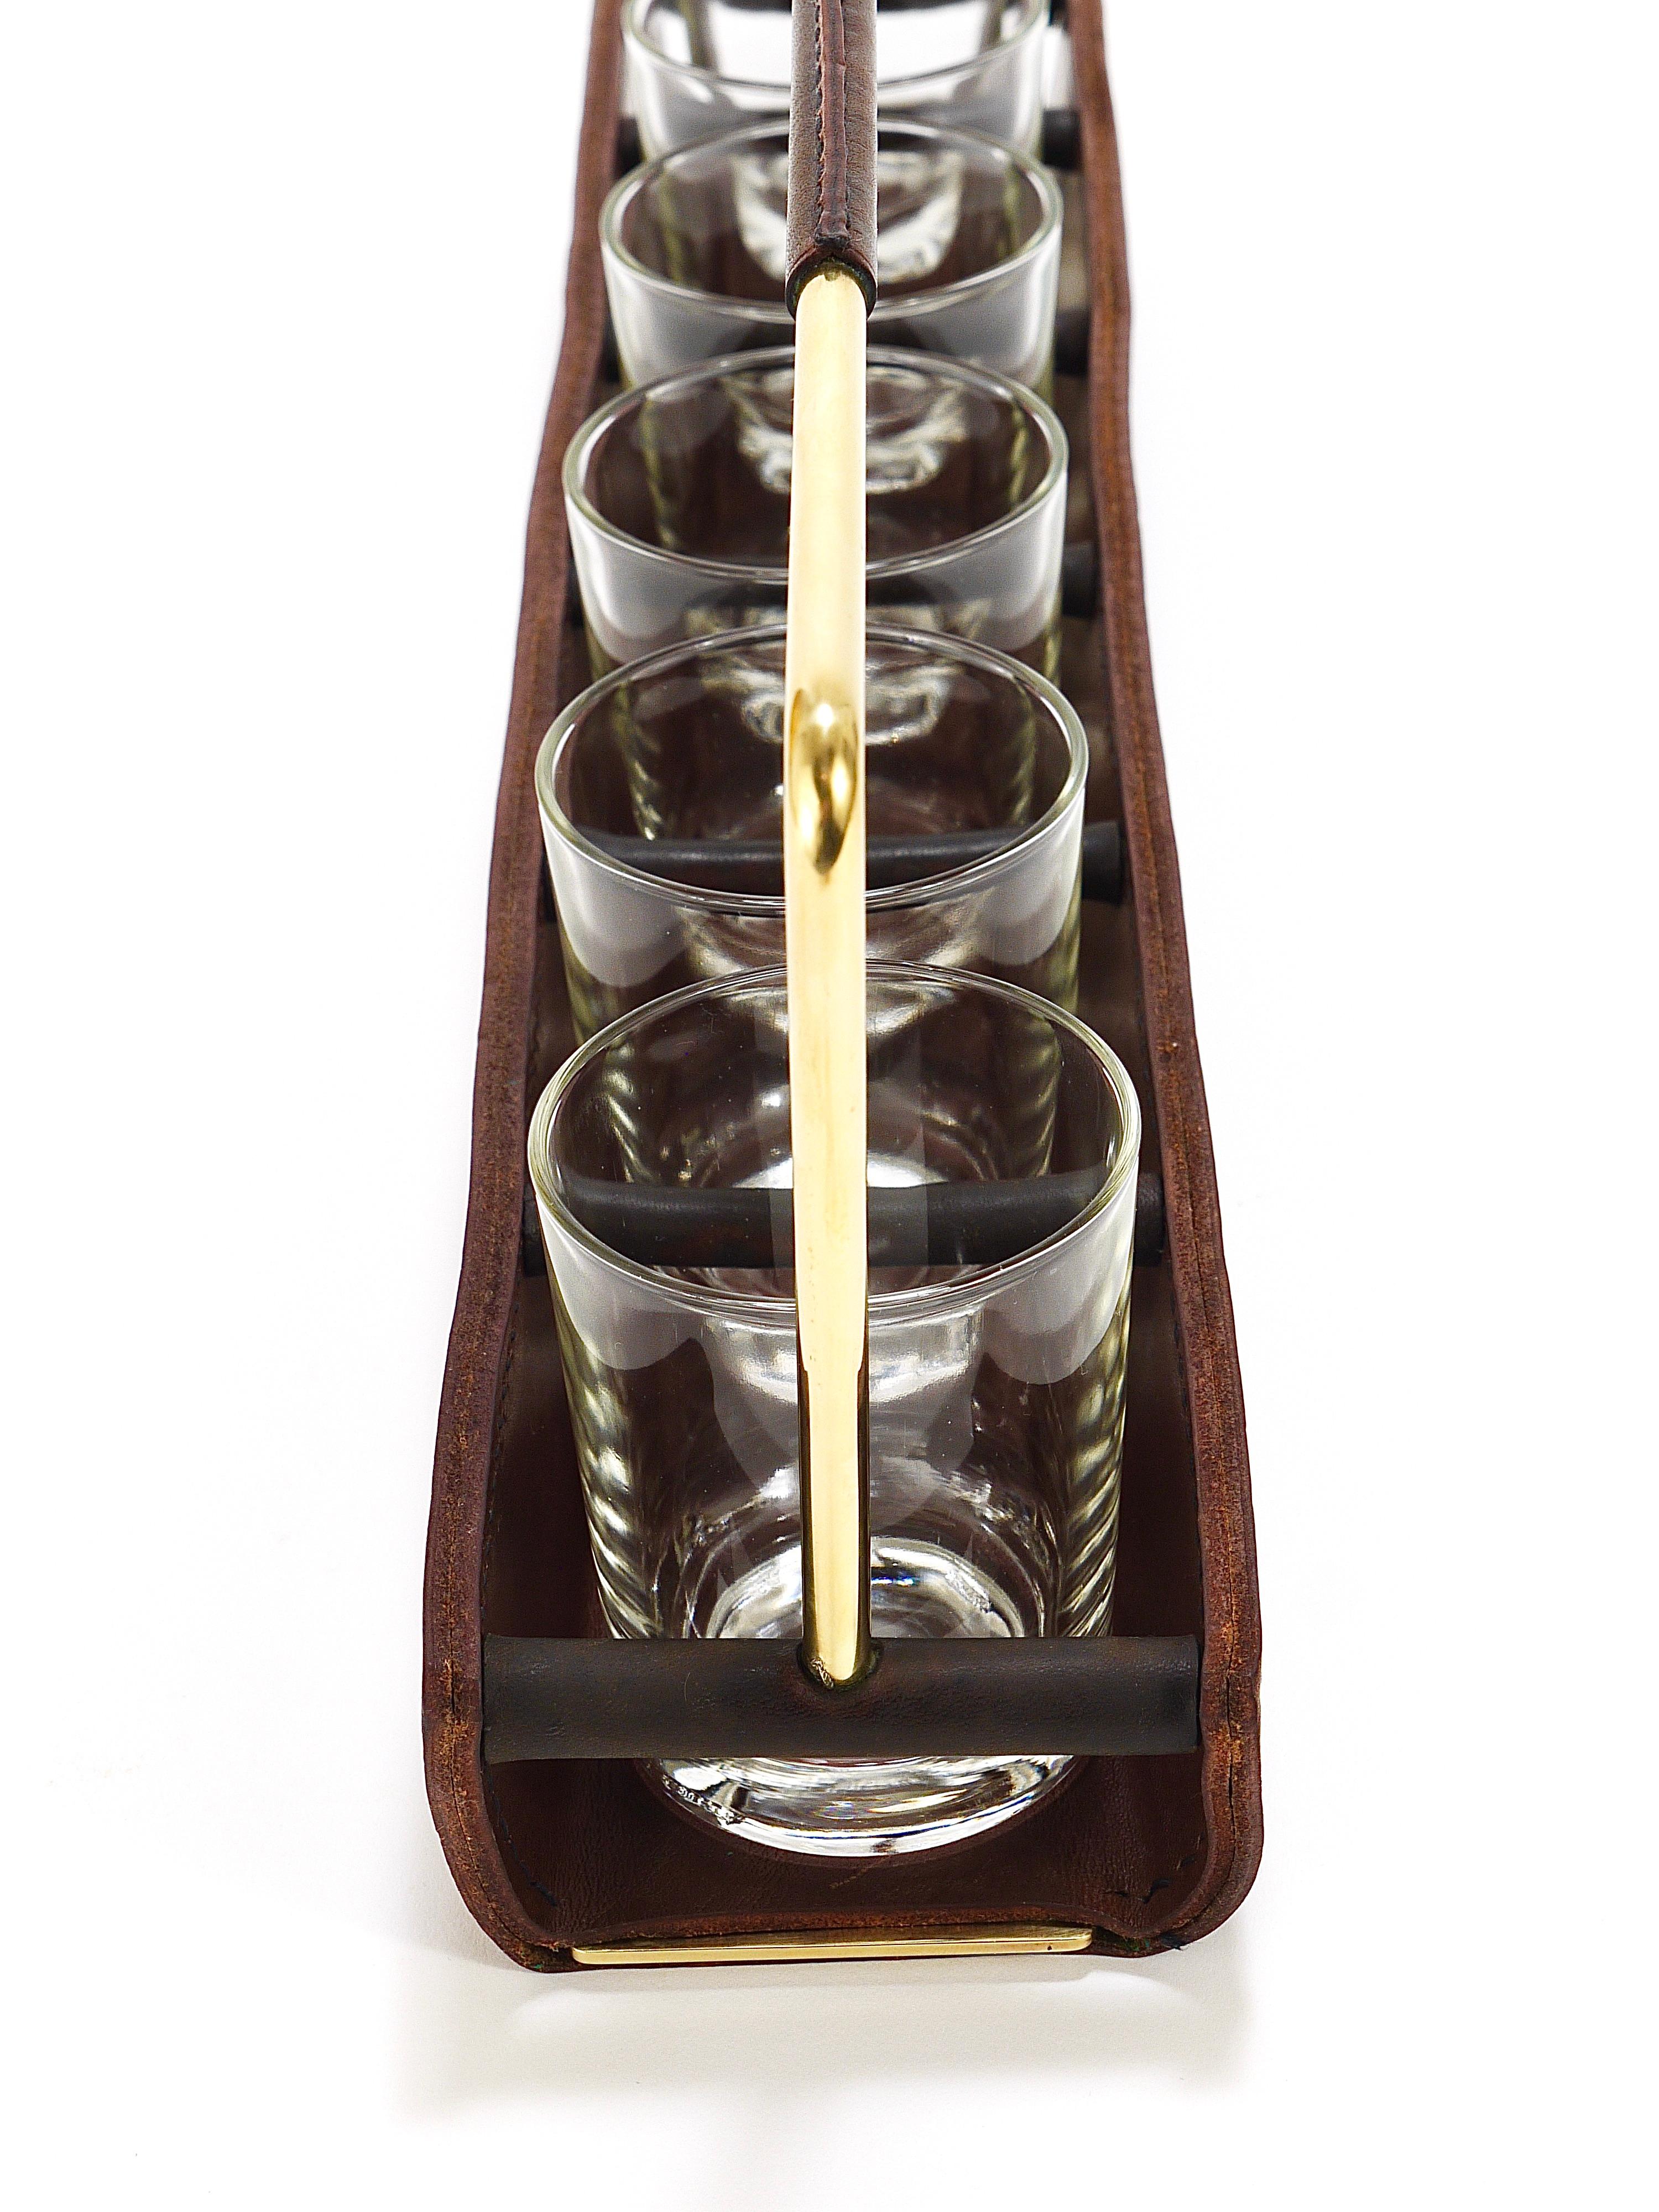 Carl Auböck II Drinking Glass Carrying Rack, Leather & Brass, Austria 1950s For Sale 13